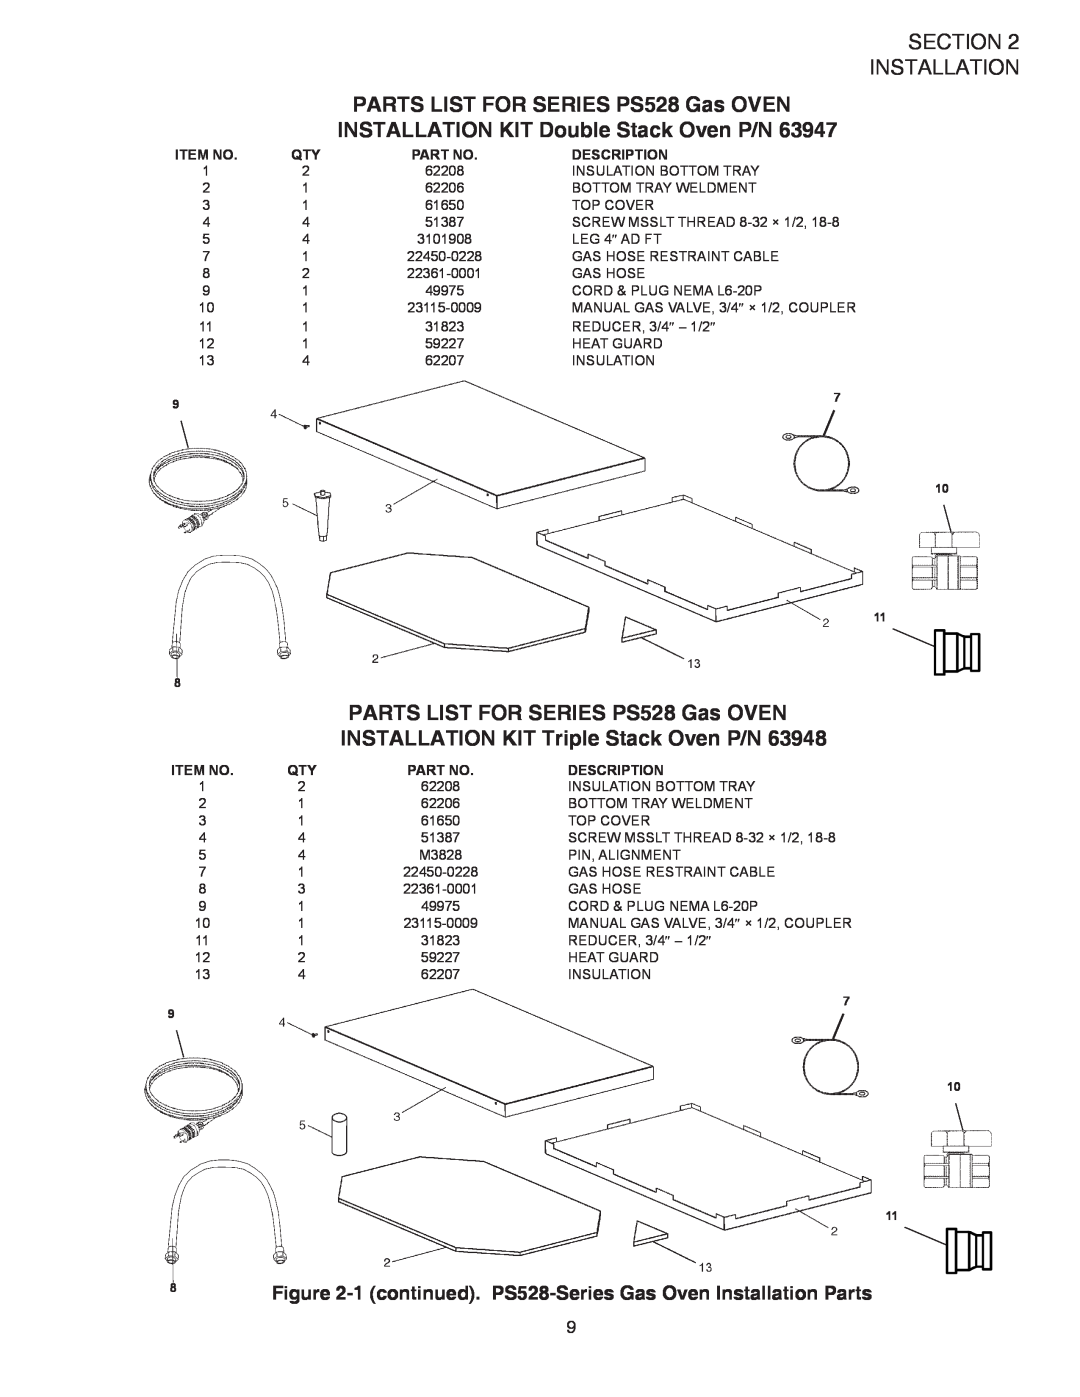 Middleby Marshall PS528G PARTS LIST FOR SERIES PS528 Gas OVEN, INSTALLATION KIT Double Stack Oven P/N, Item No, Part No 